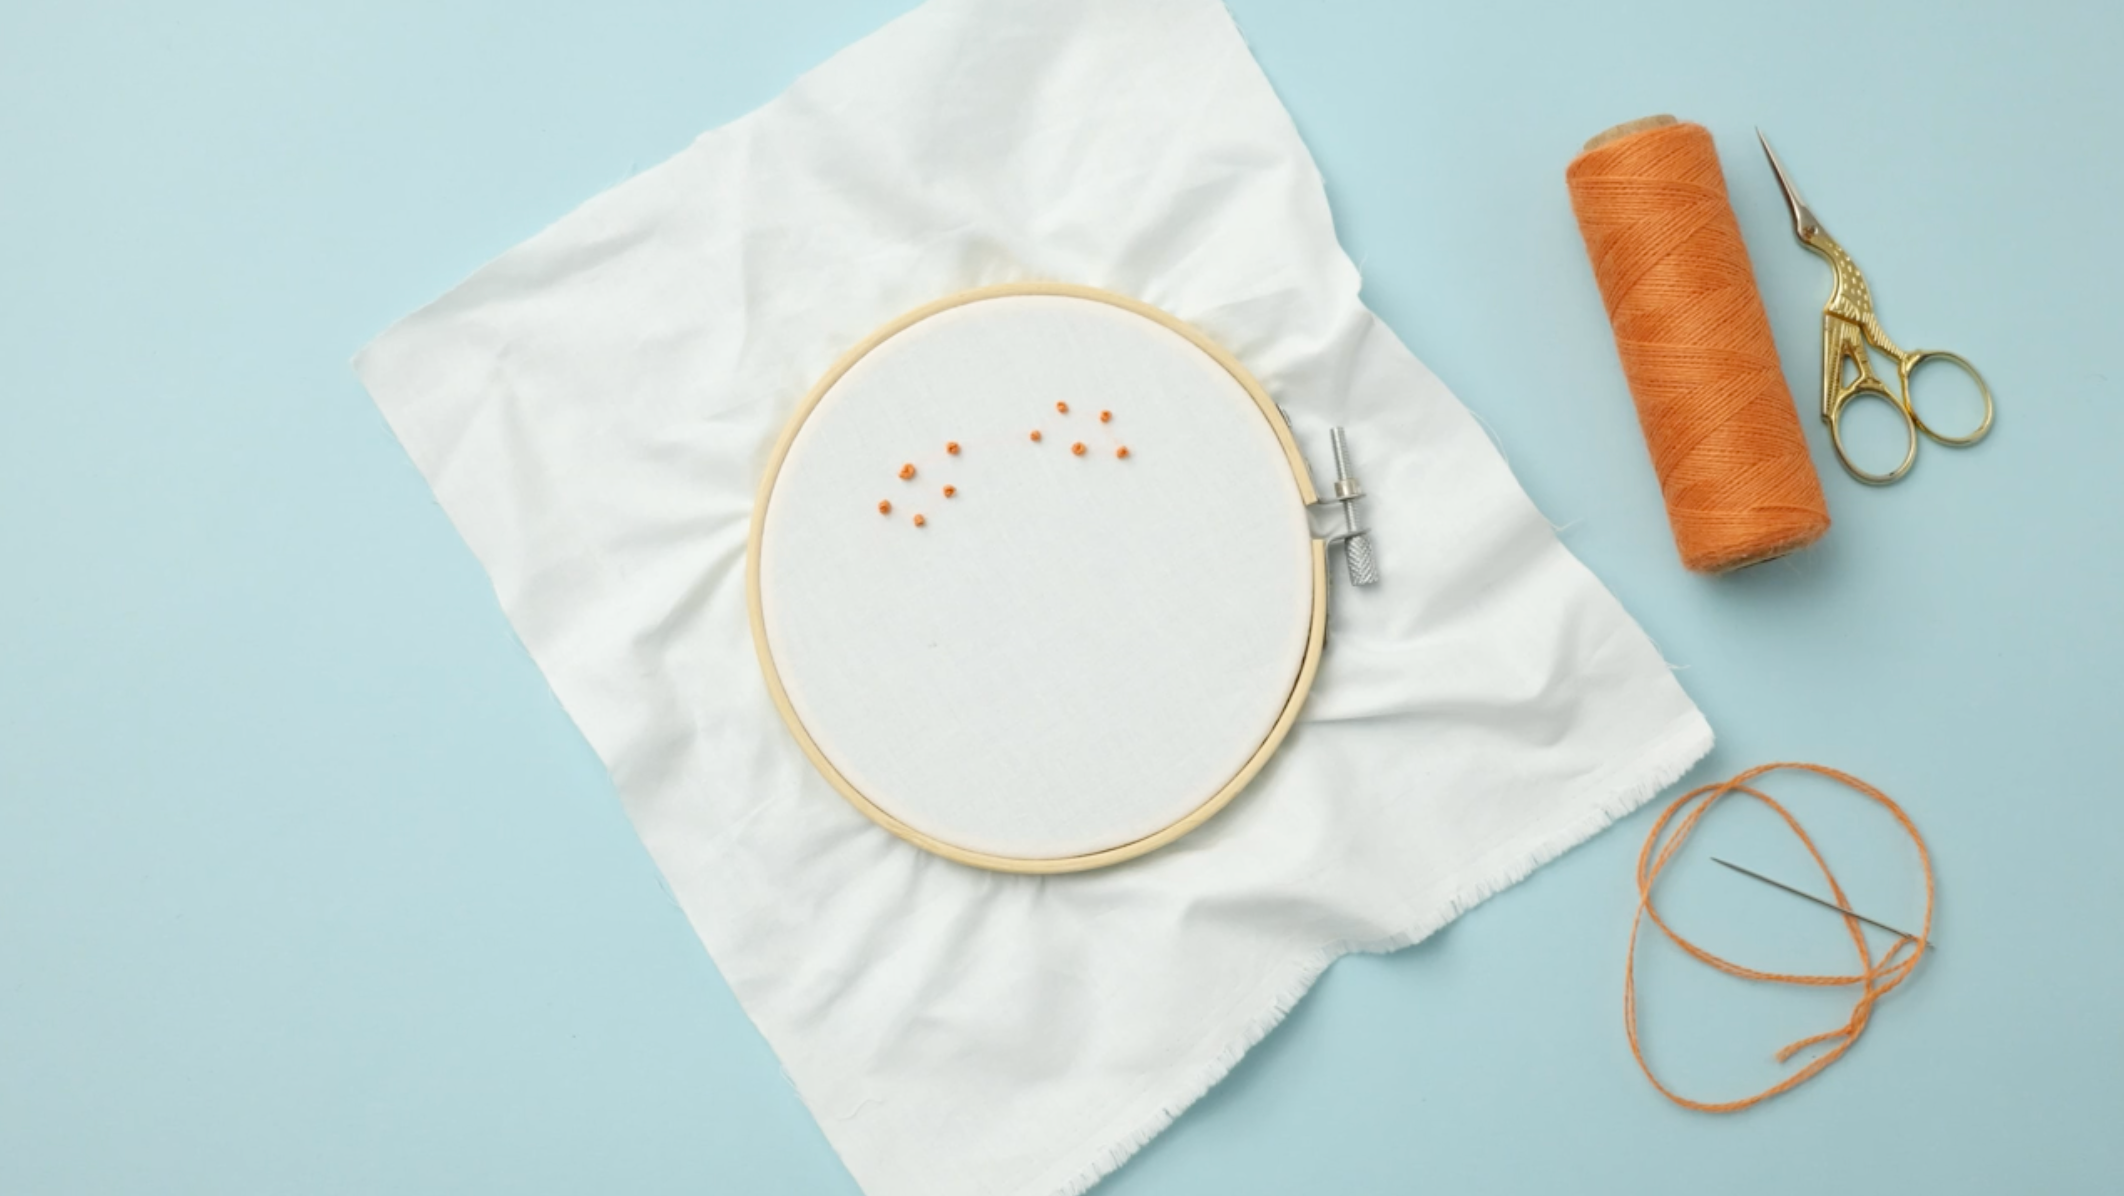 French Knot Tutorial: Step-By-Step Instructions